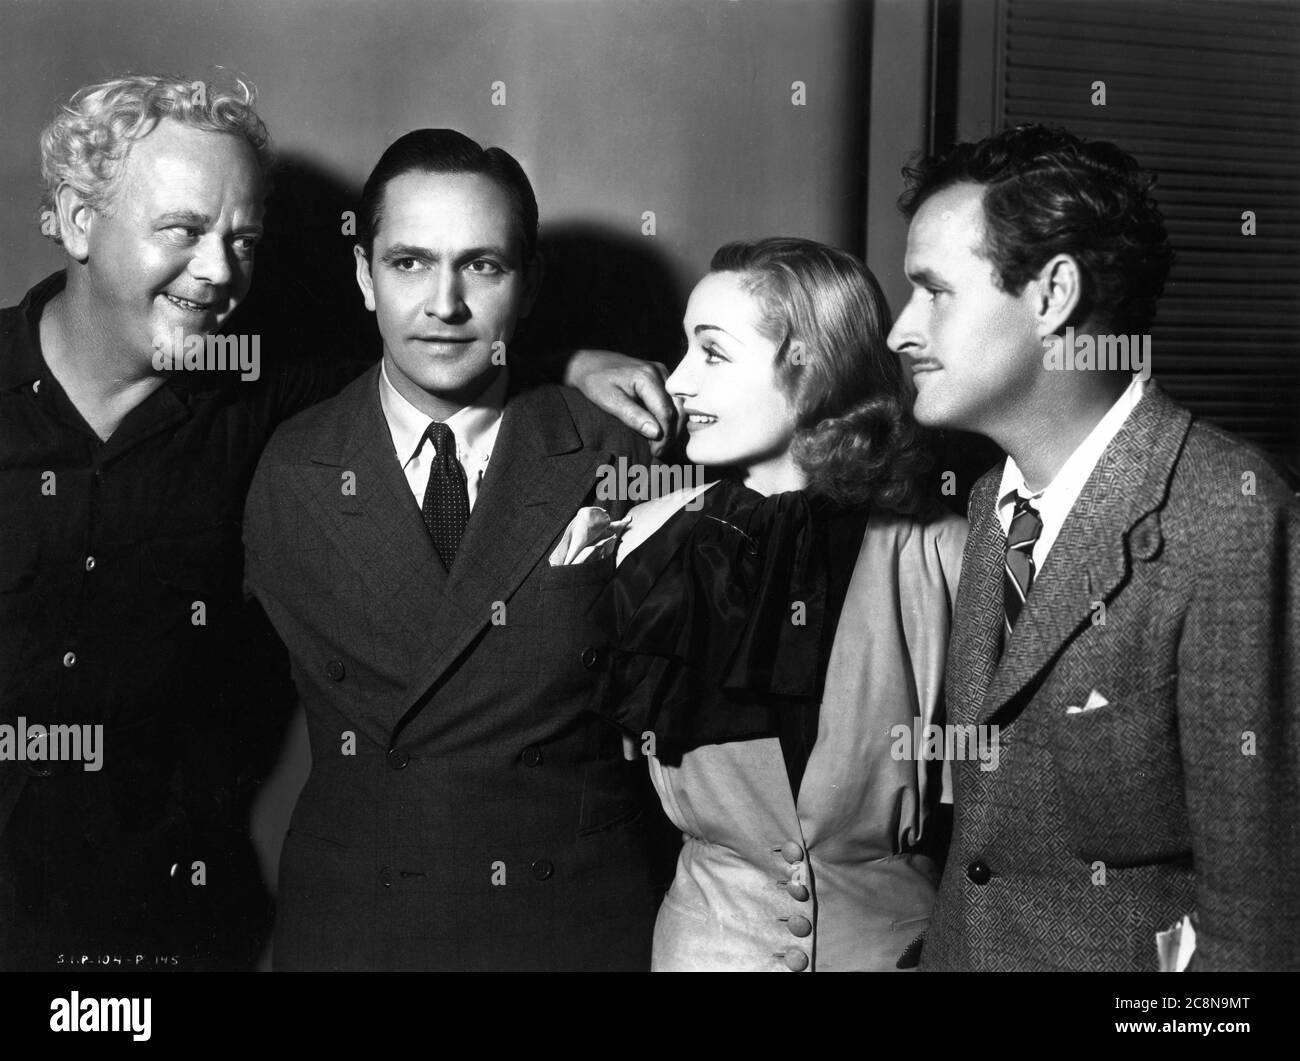 https://c8.alamy.com/comp/2C8N9MT/charles-winninger-fredric-march-carole-lombard-and-director-william-a-wellman-on-set-candid-during-filming-of-nothing-sacred-1937-screenplay-ben-hecht-producer-david-o-selznick-selznick-international-pictures-united-artists-2C8N9MT.jpg